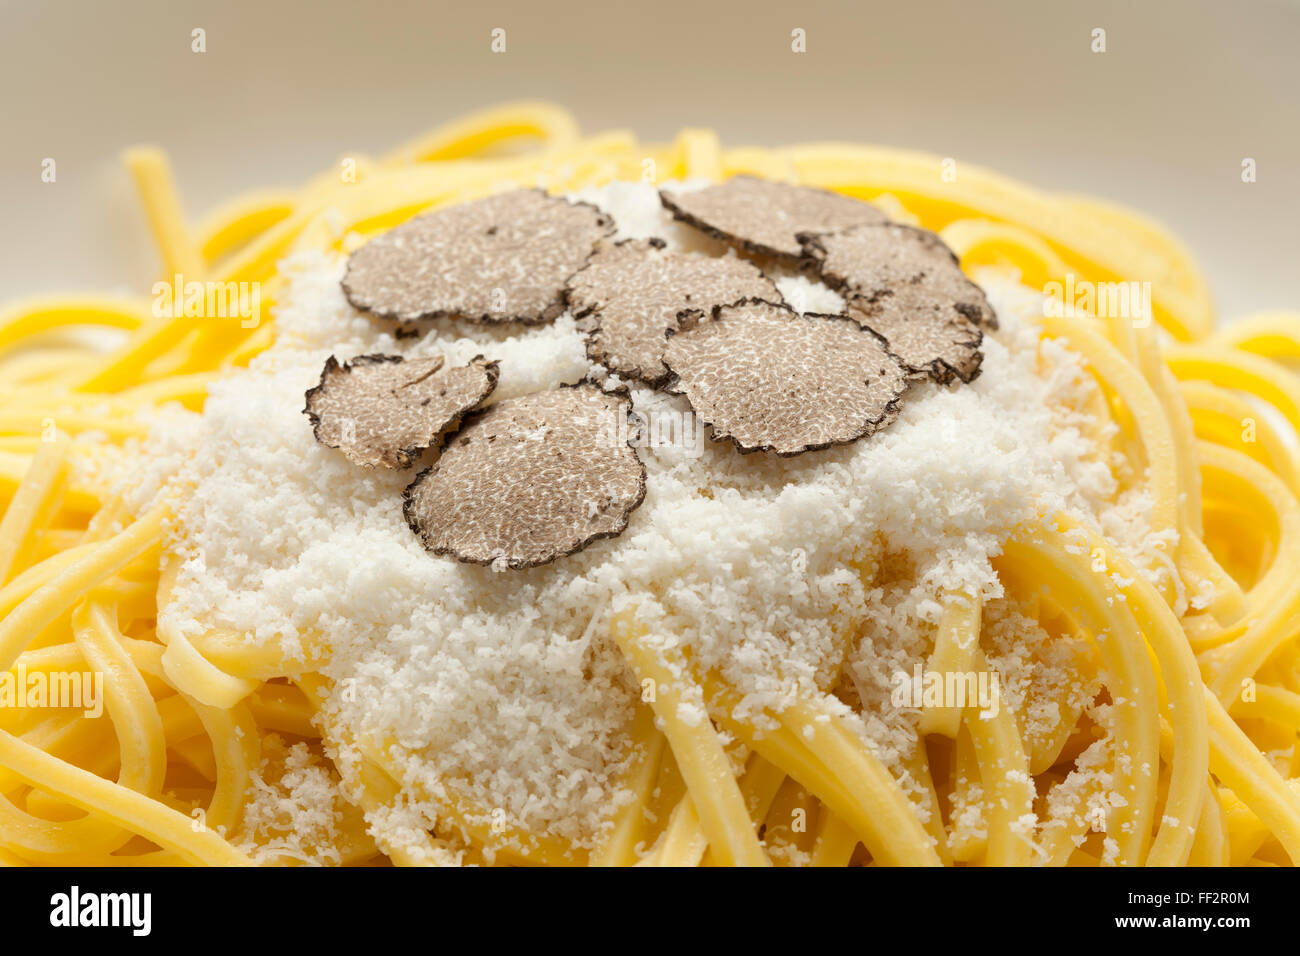 Spaghetti with black winter truffle and Parmesan cheese close up Stock Photo